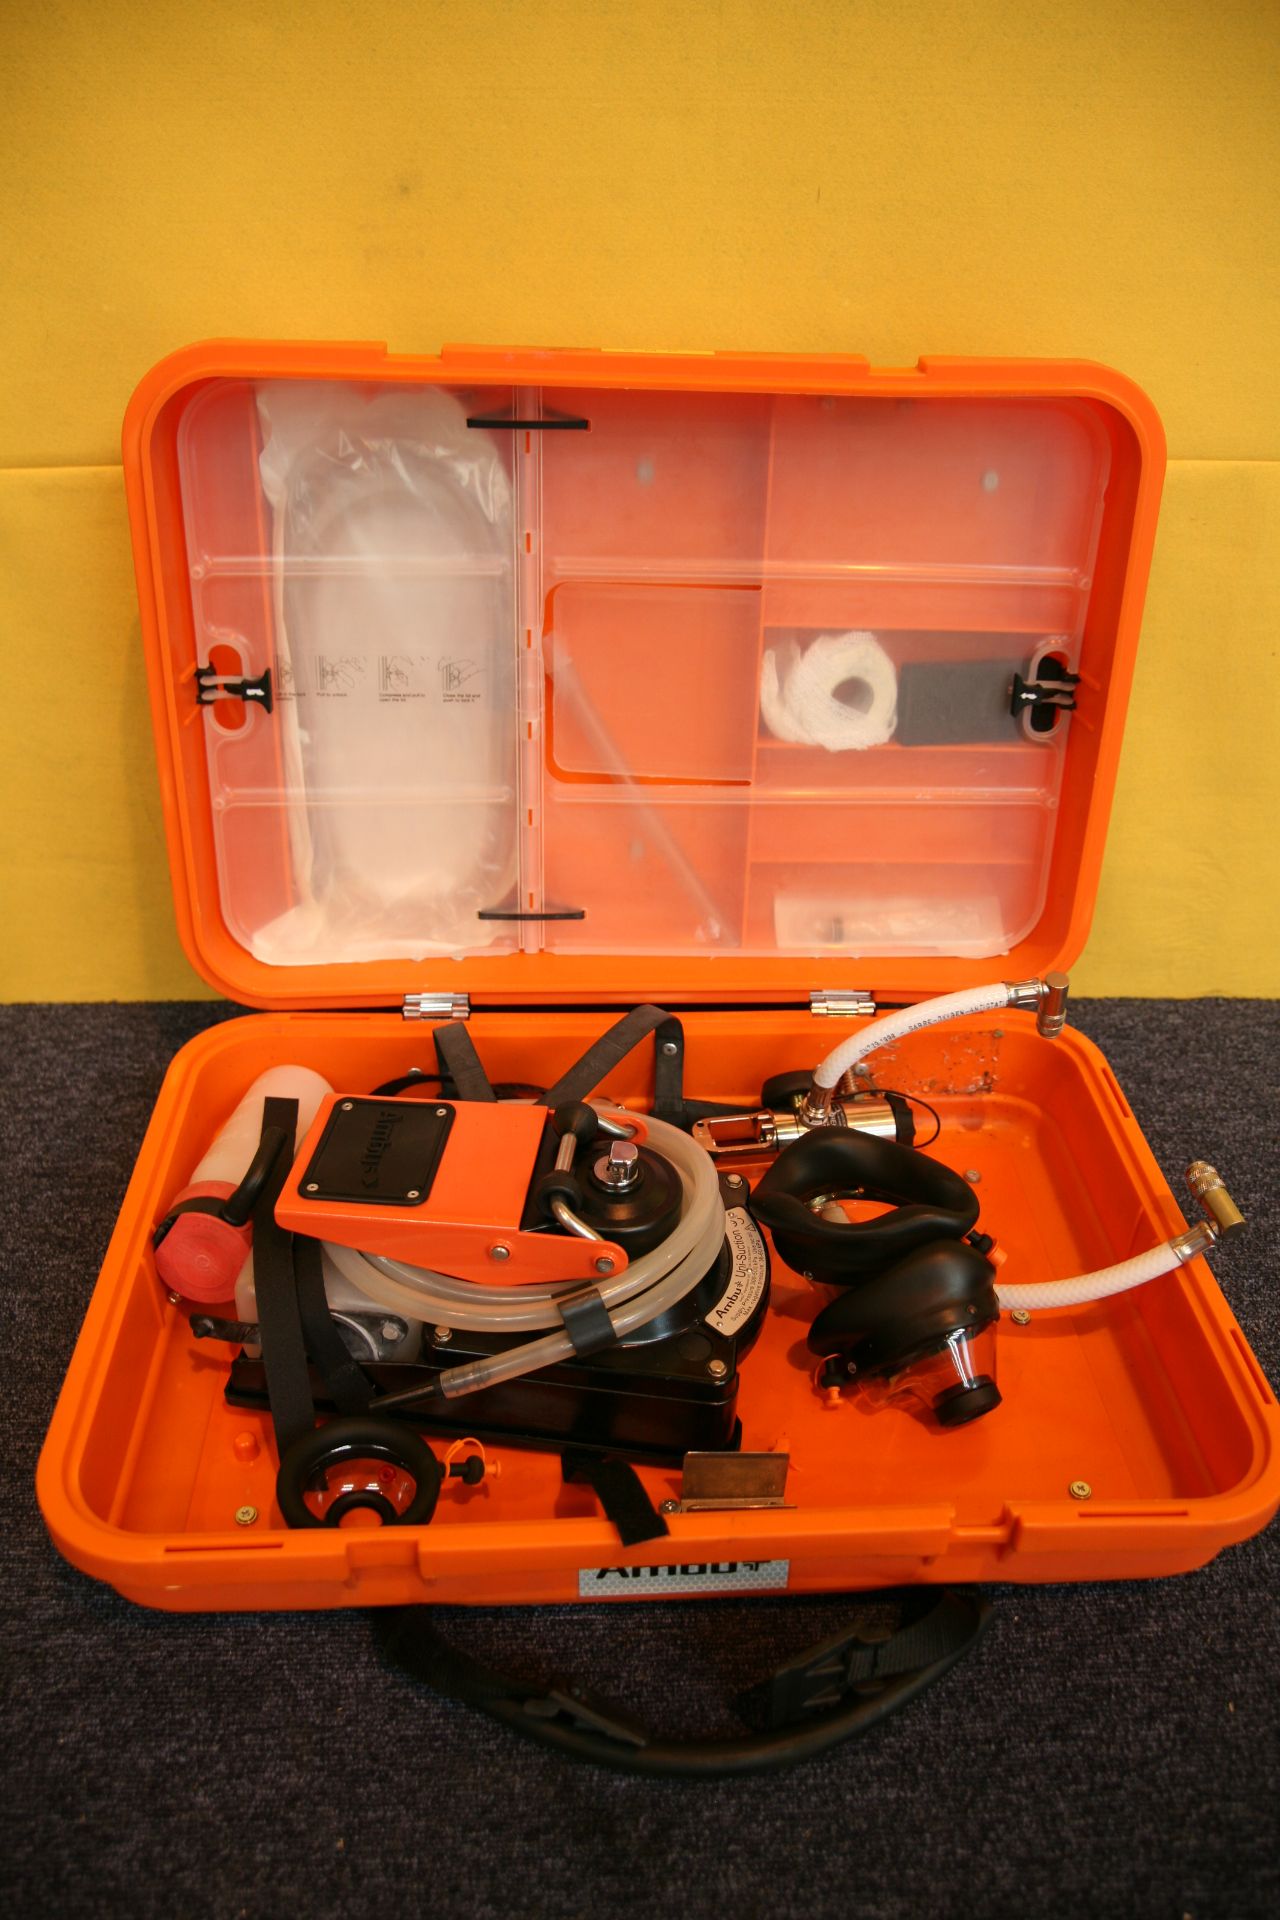 Ambu Resuscitation Kit In Case *Incomplete* (View Photo For Components) (10295)